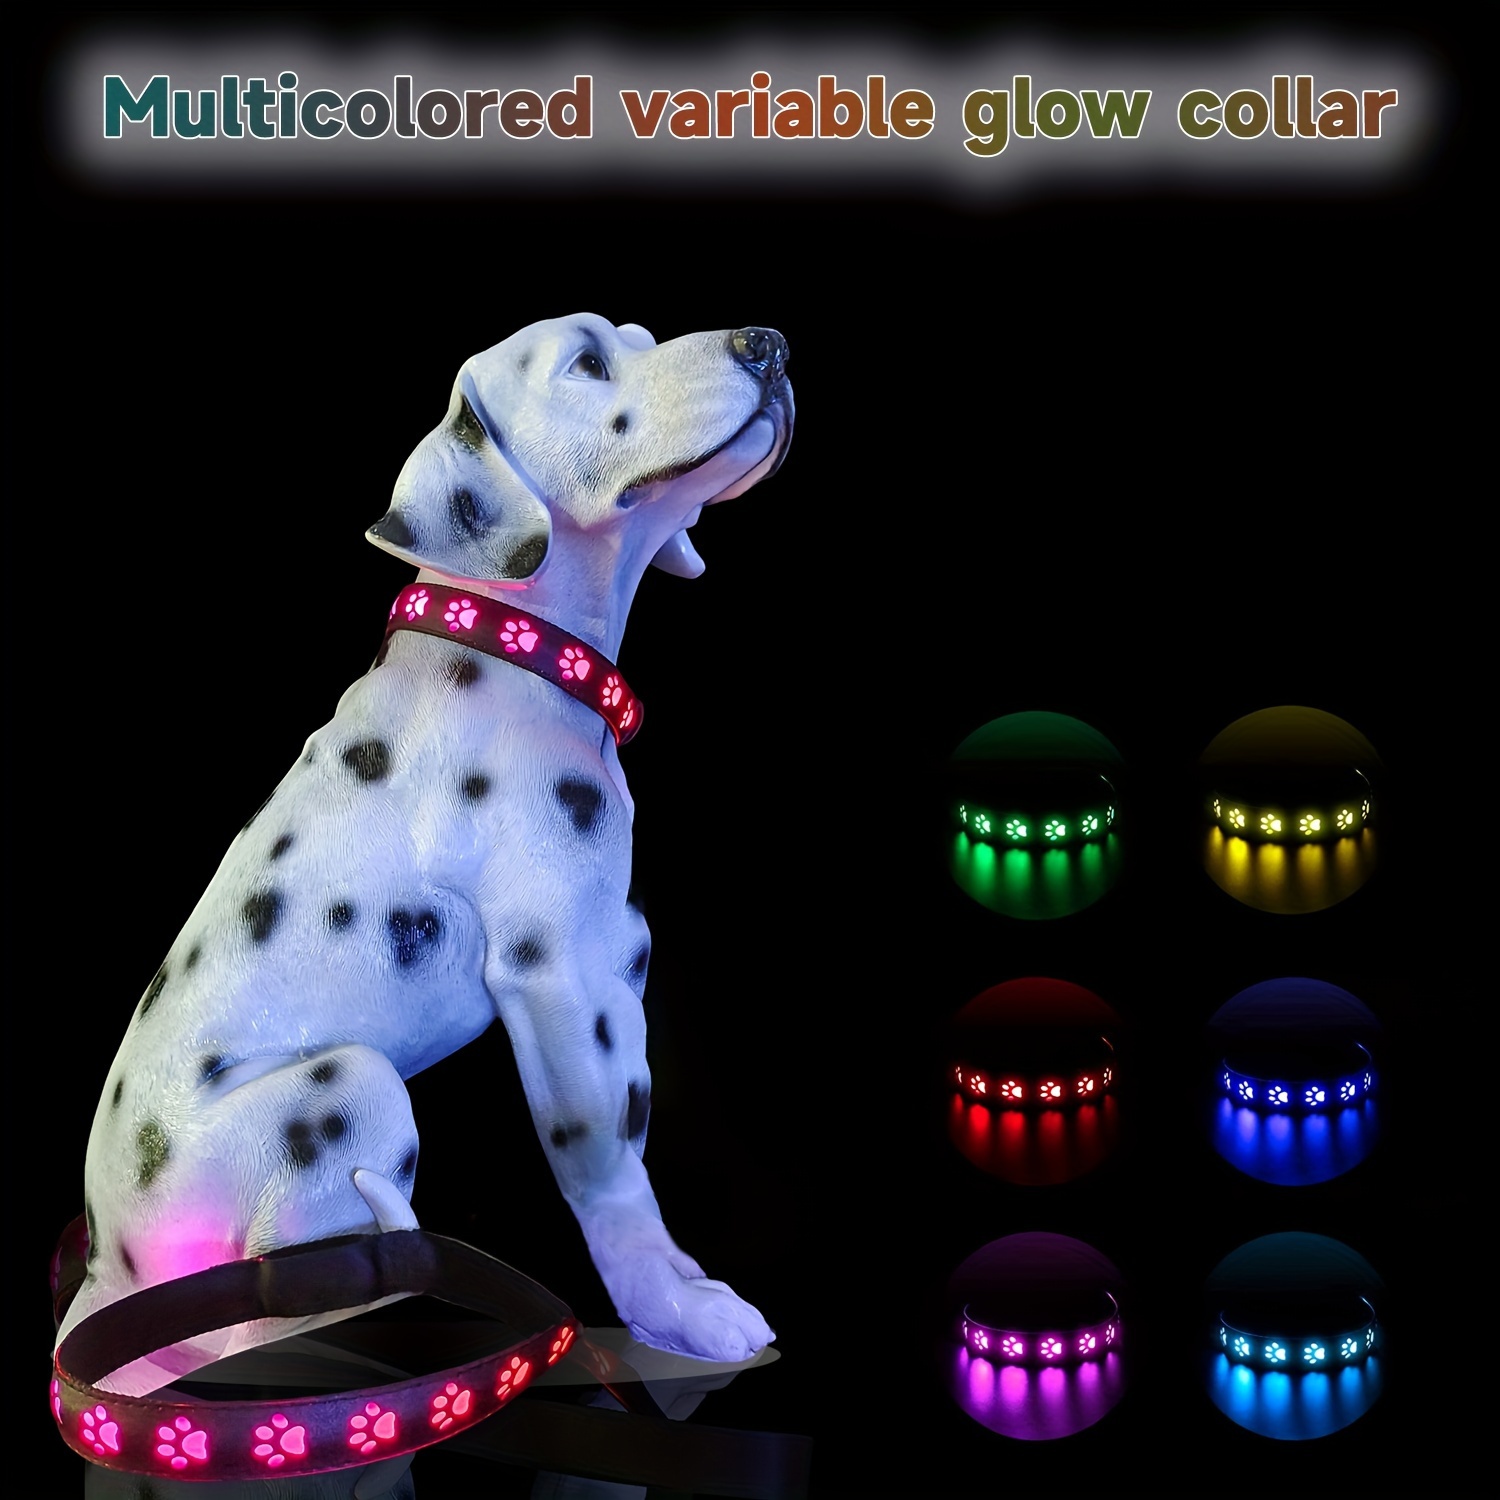 

Usb Rechargeable Pet Dog Collar, Artificial Leather Dog Glowing Neck Collar With Paw Print Design, Suitable For Outdoor Night Safety Walking